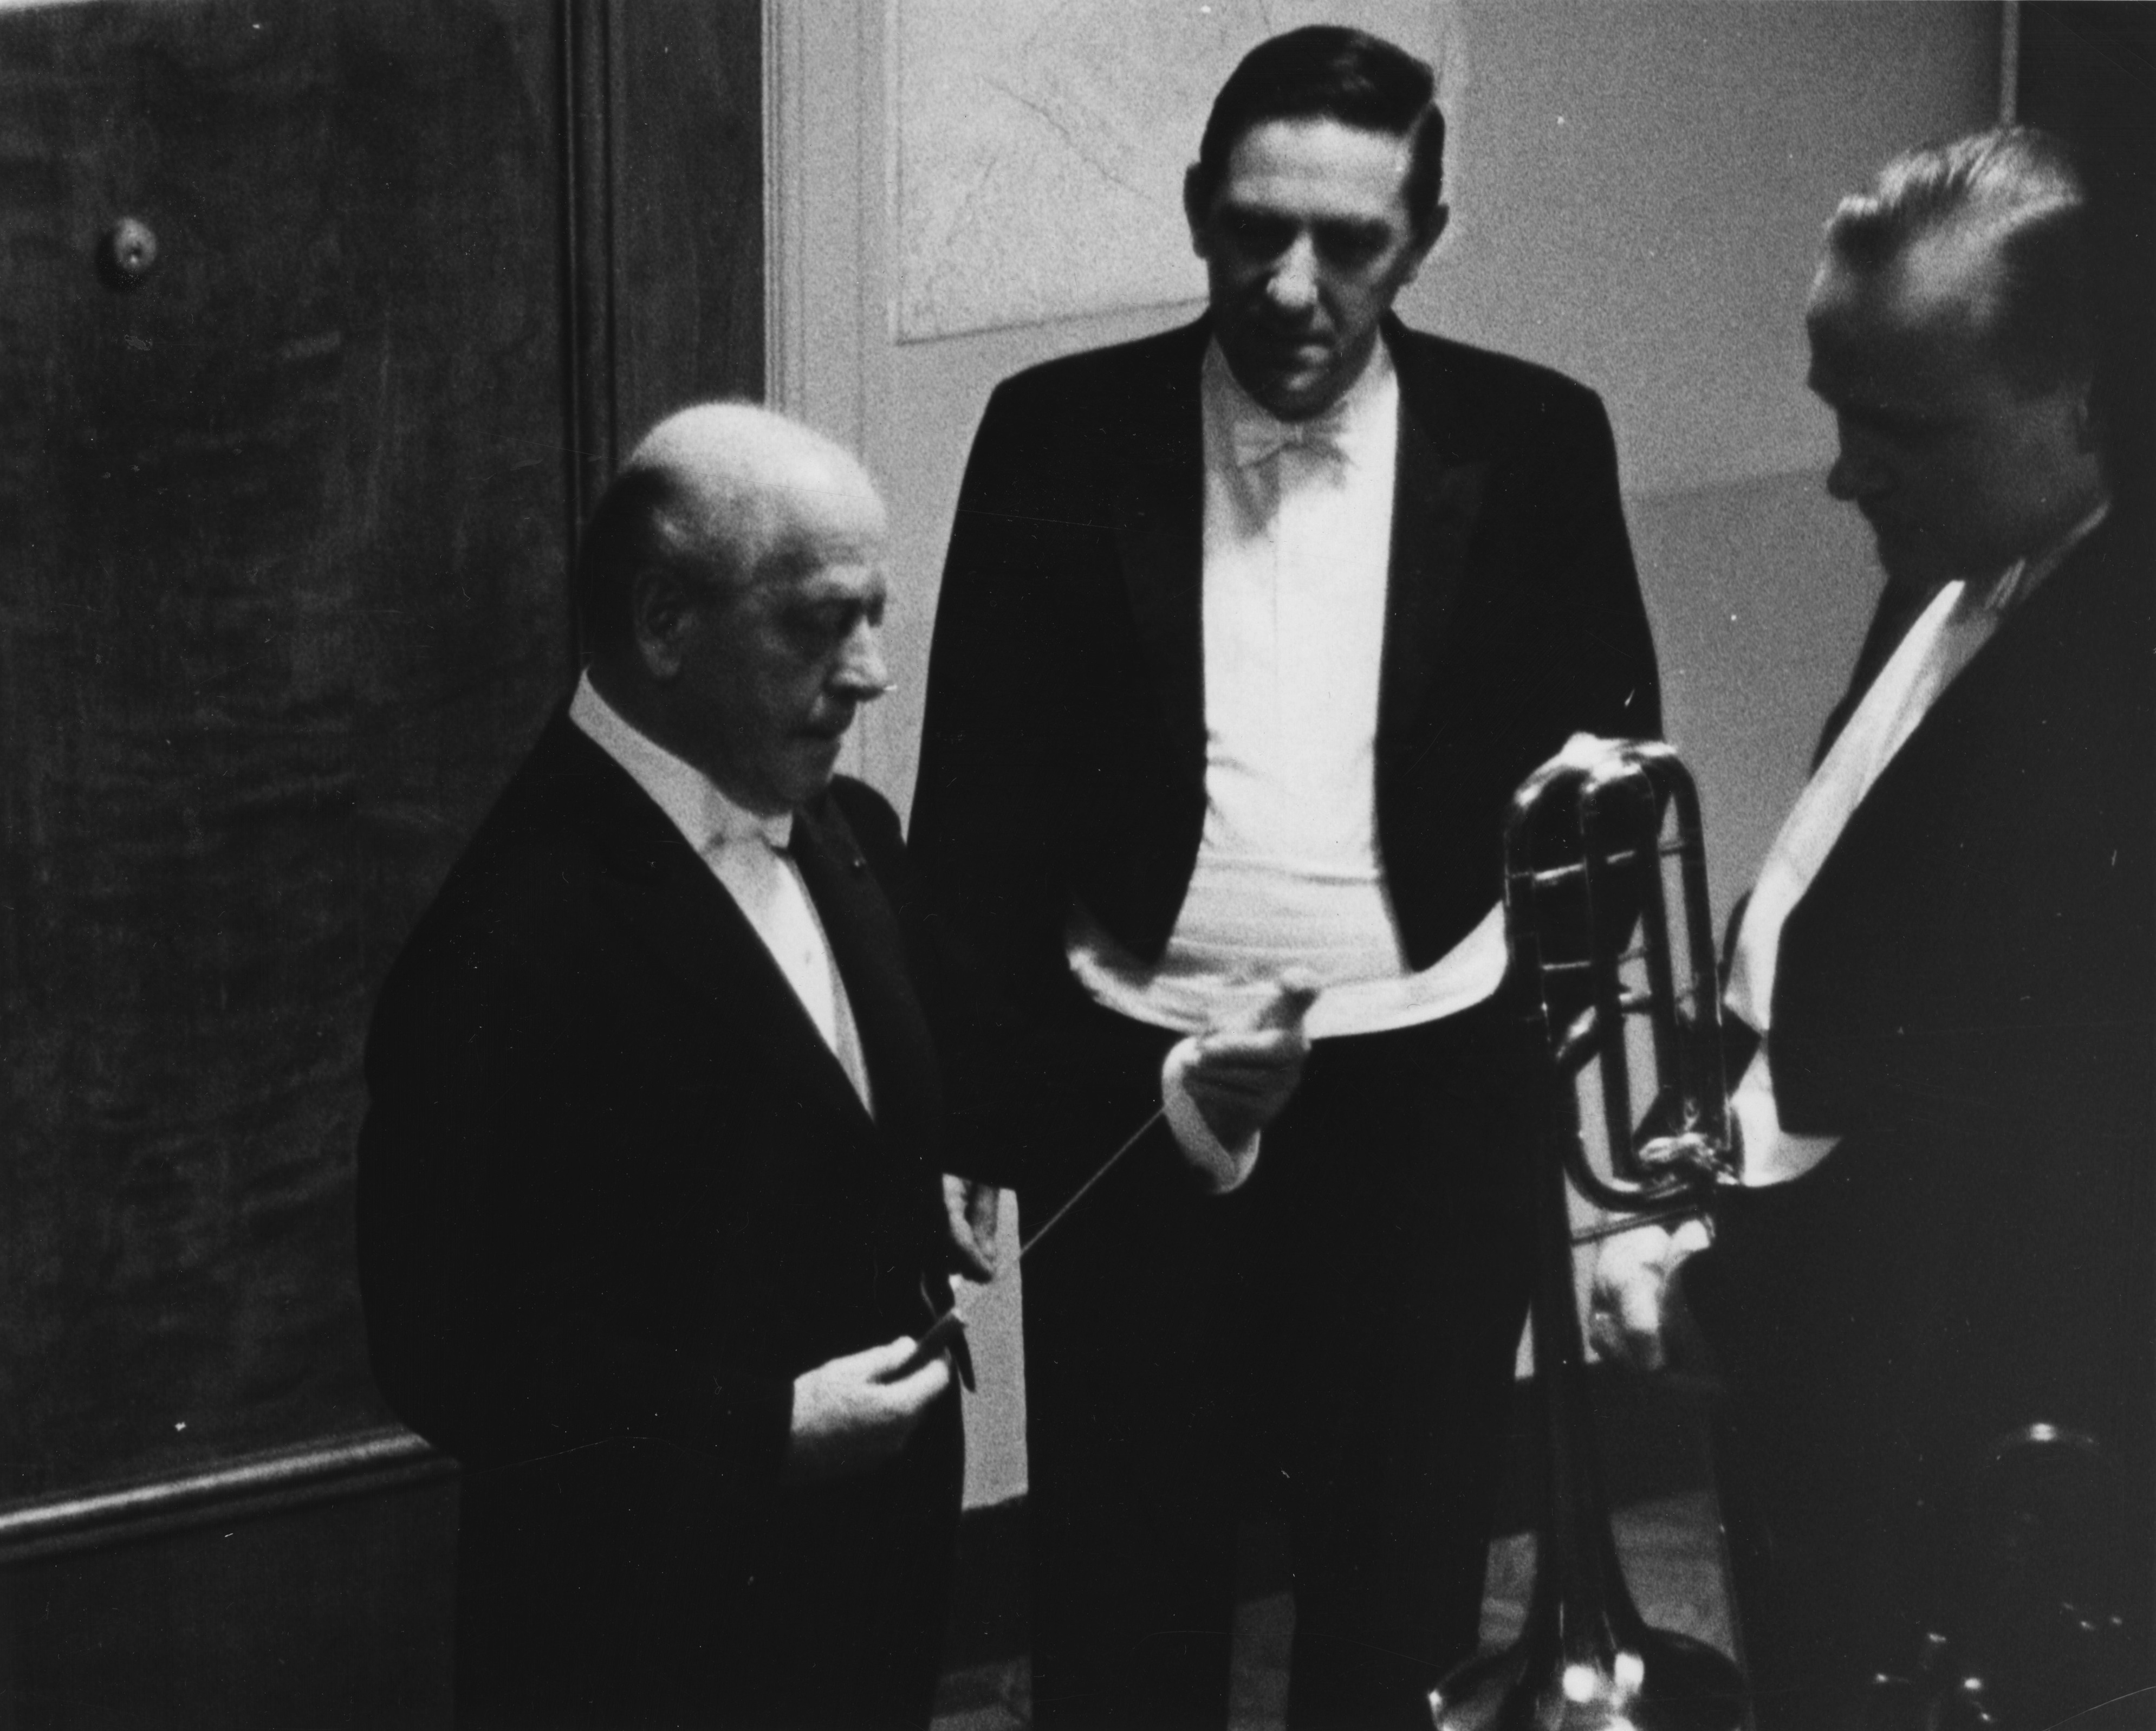 Eugene Ormandy and Orchestra Members, 1960s